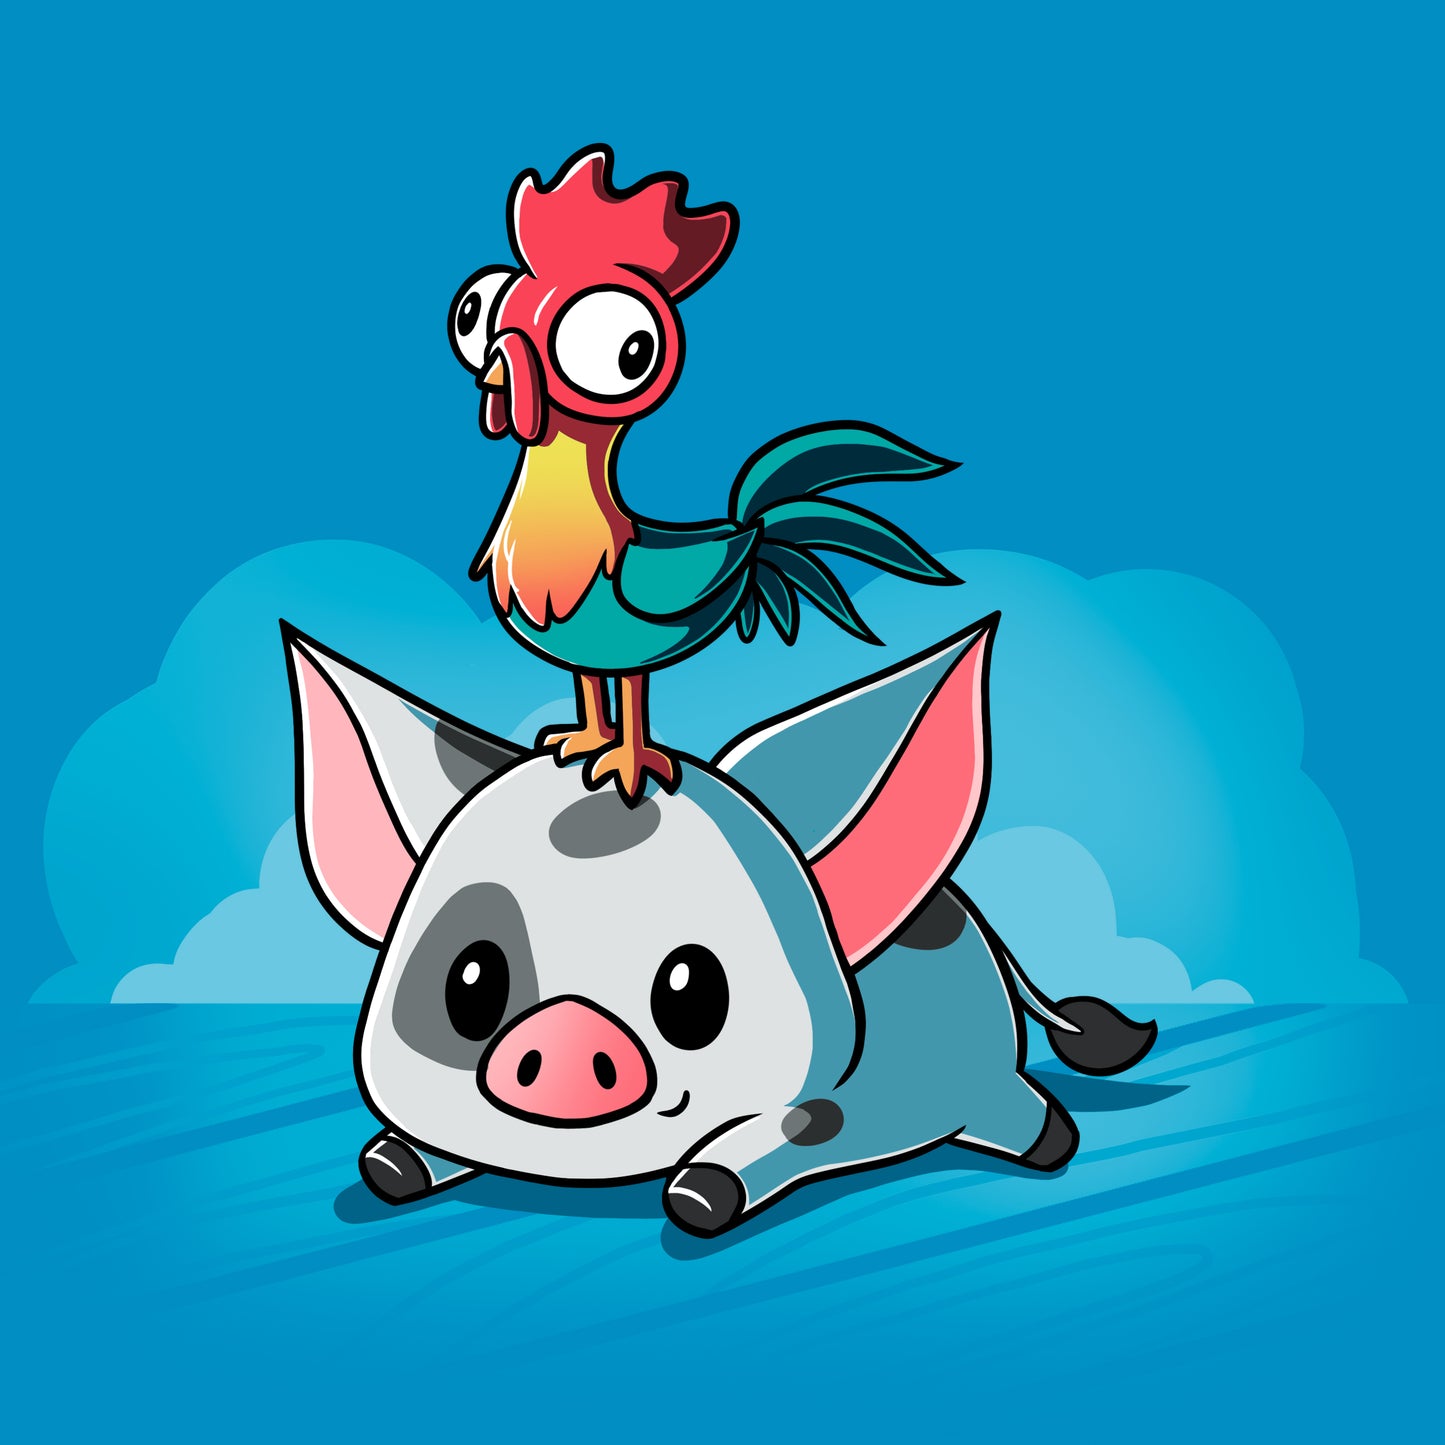 A Disney licensed cartoon pig named Pua on top of a rooster named Hei Hei.